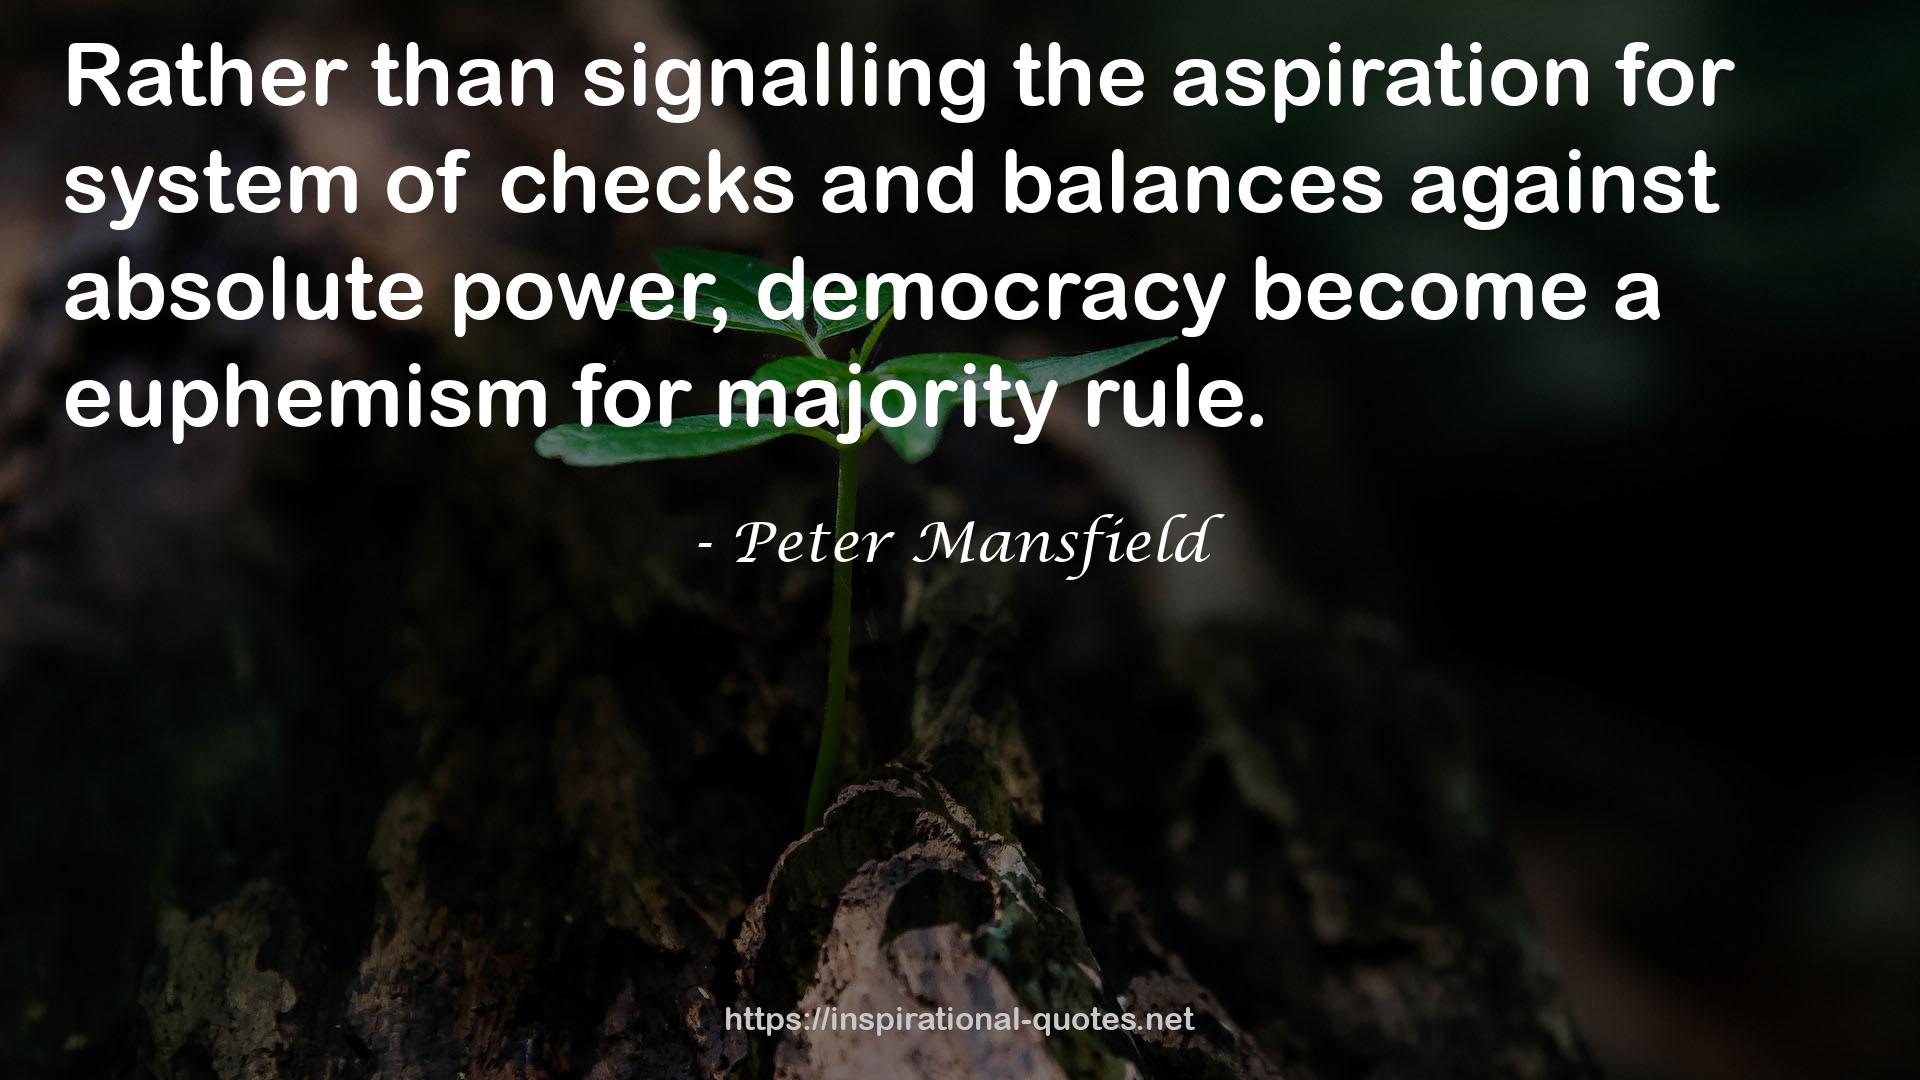 Peter Mansfield QUOTES